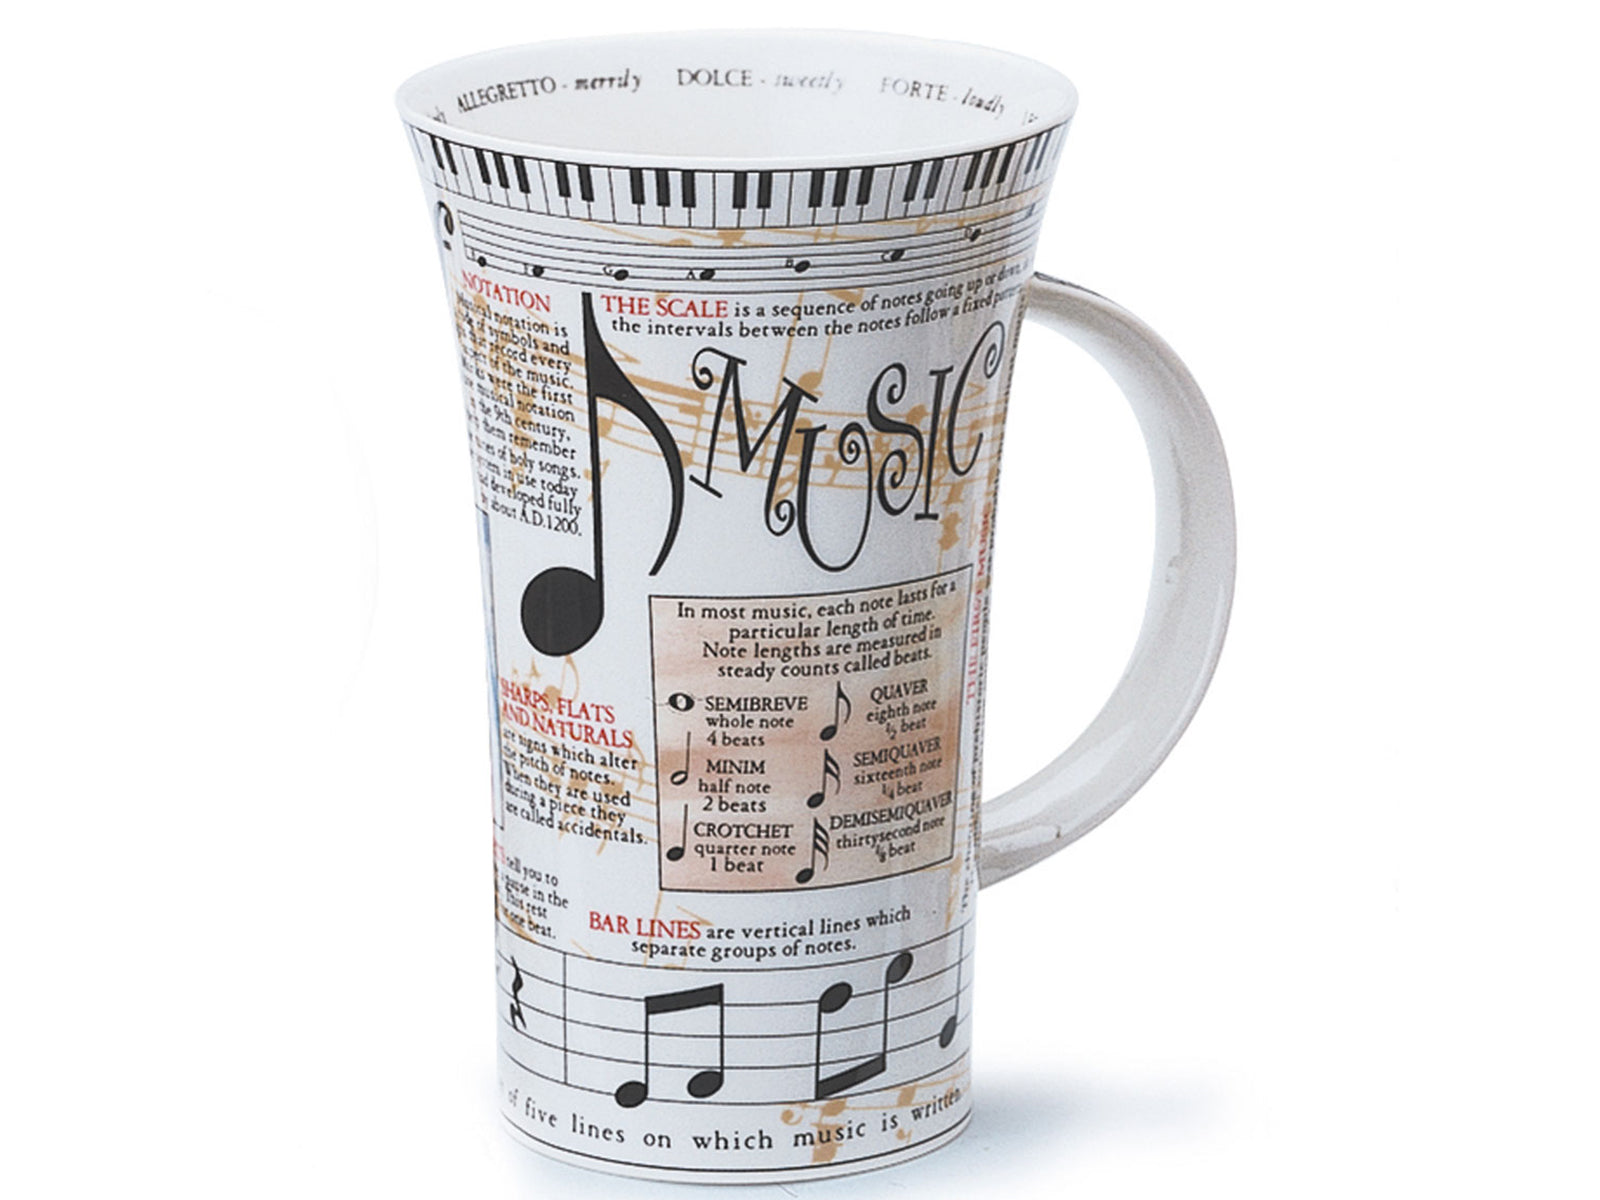 Dunoon Glencoe Music Mug is a large fine bone china mug that is printed with all different facts and terminology regarding the study of music around its exterior, along with a piano-print on the handle with all the labelled keys and definitions of the Latin music terminology printed around the inner rim of the mug.